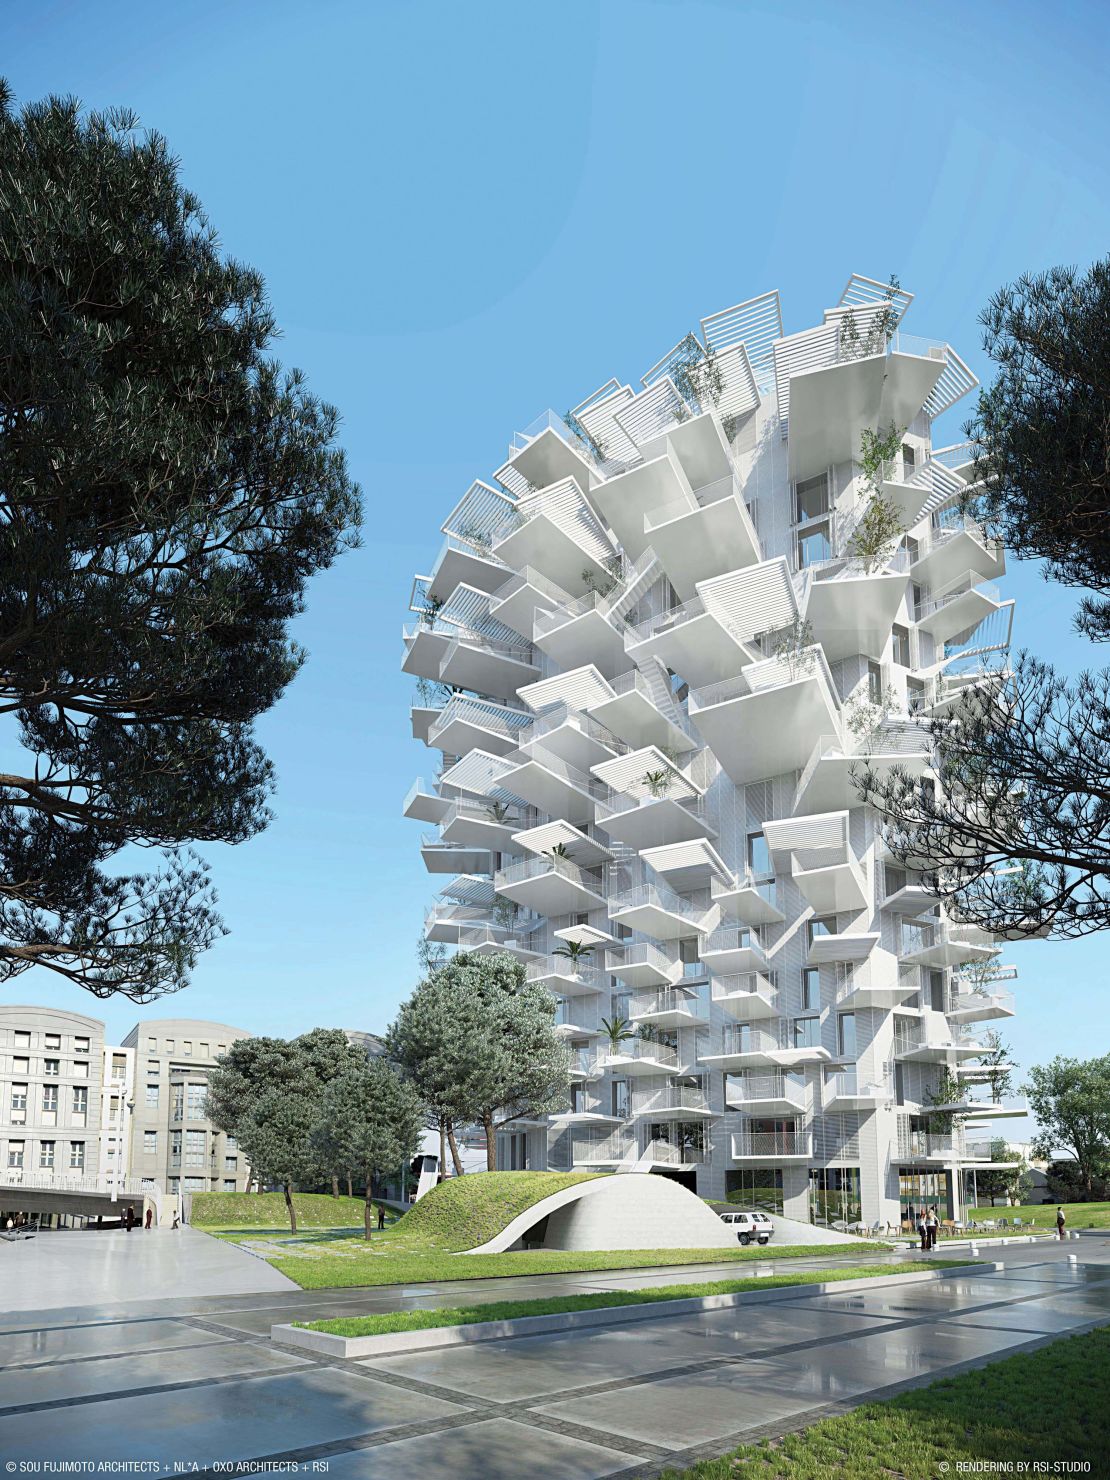 An artist's rendering of L'Arbre Blanc, a building currently under construction in Montpellier, France